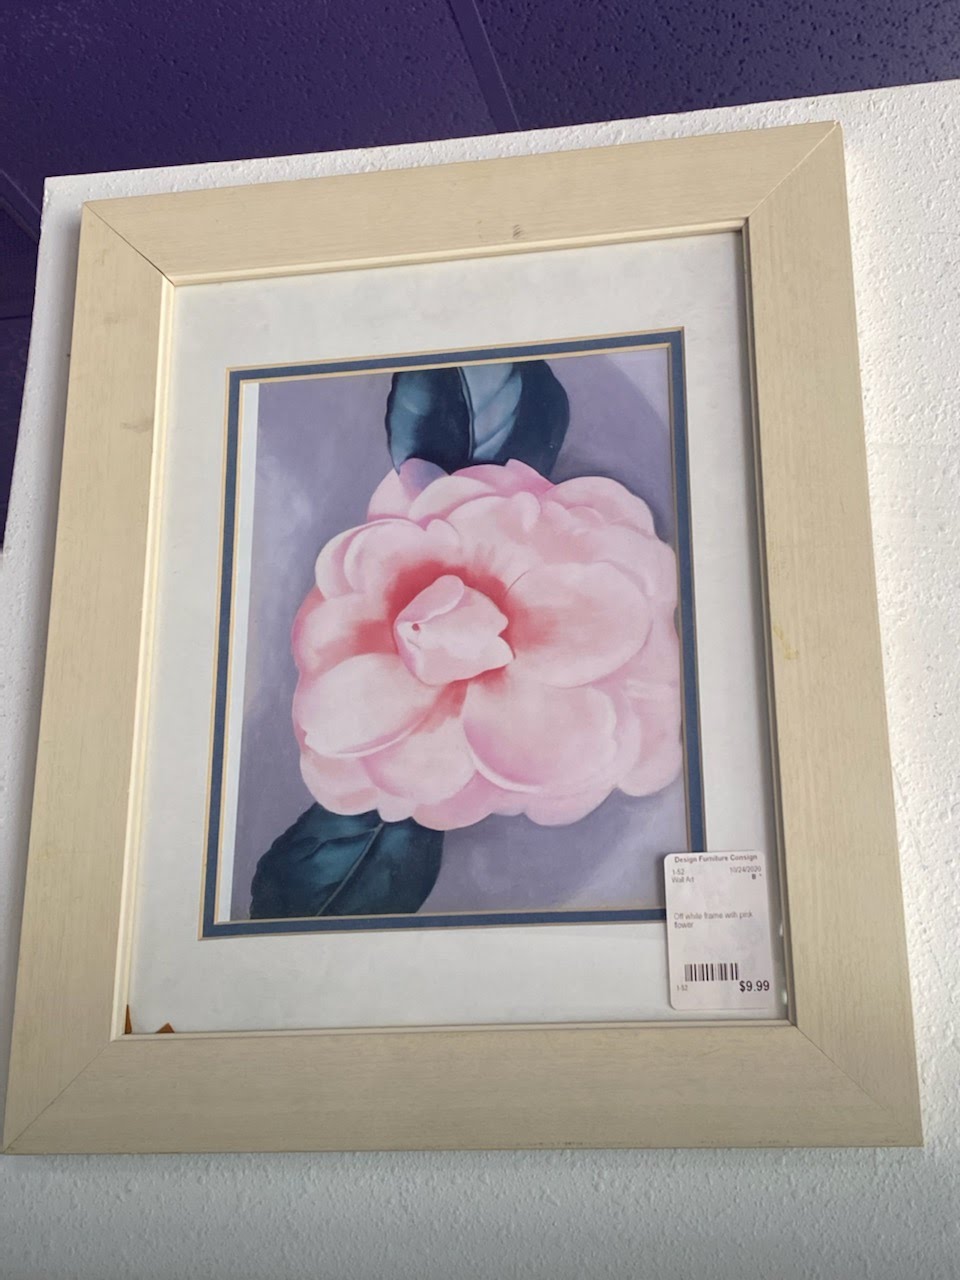 Off white frame with pink flower